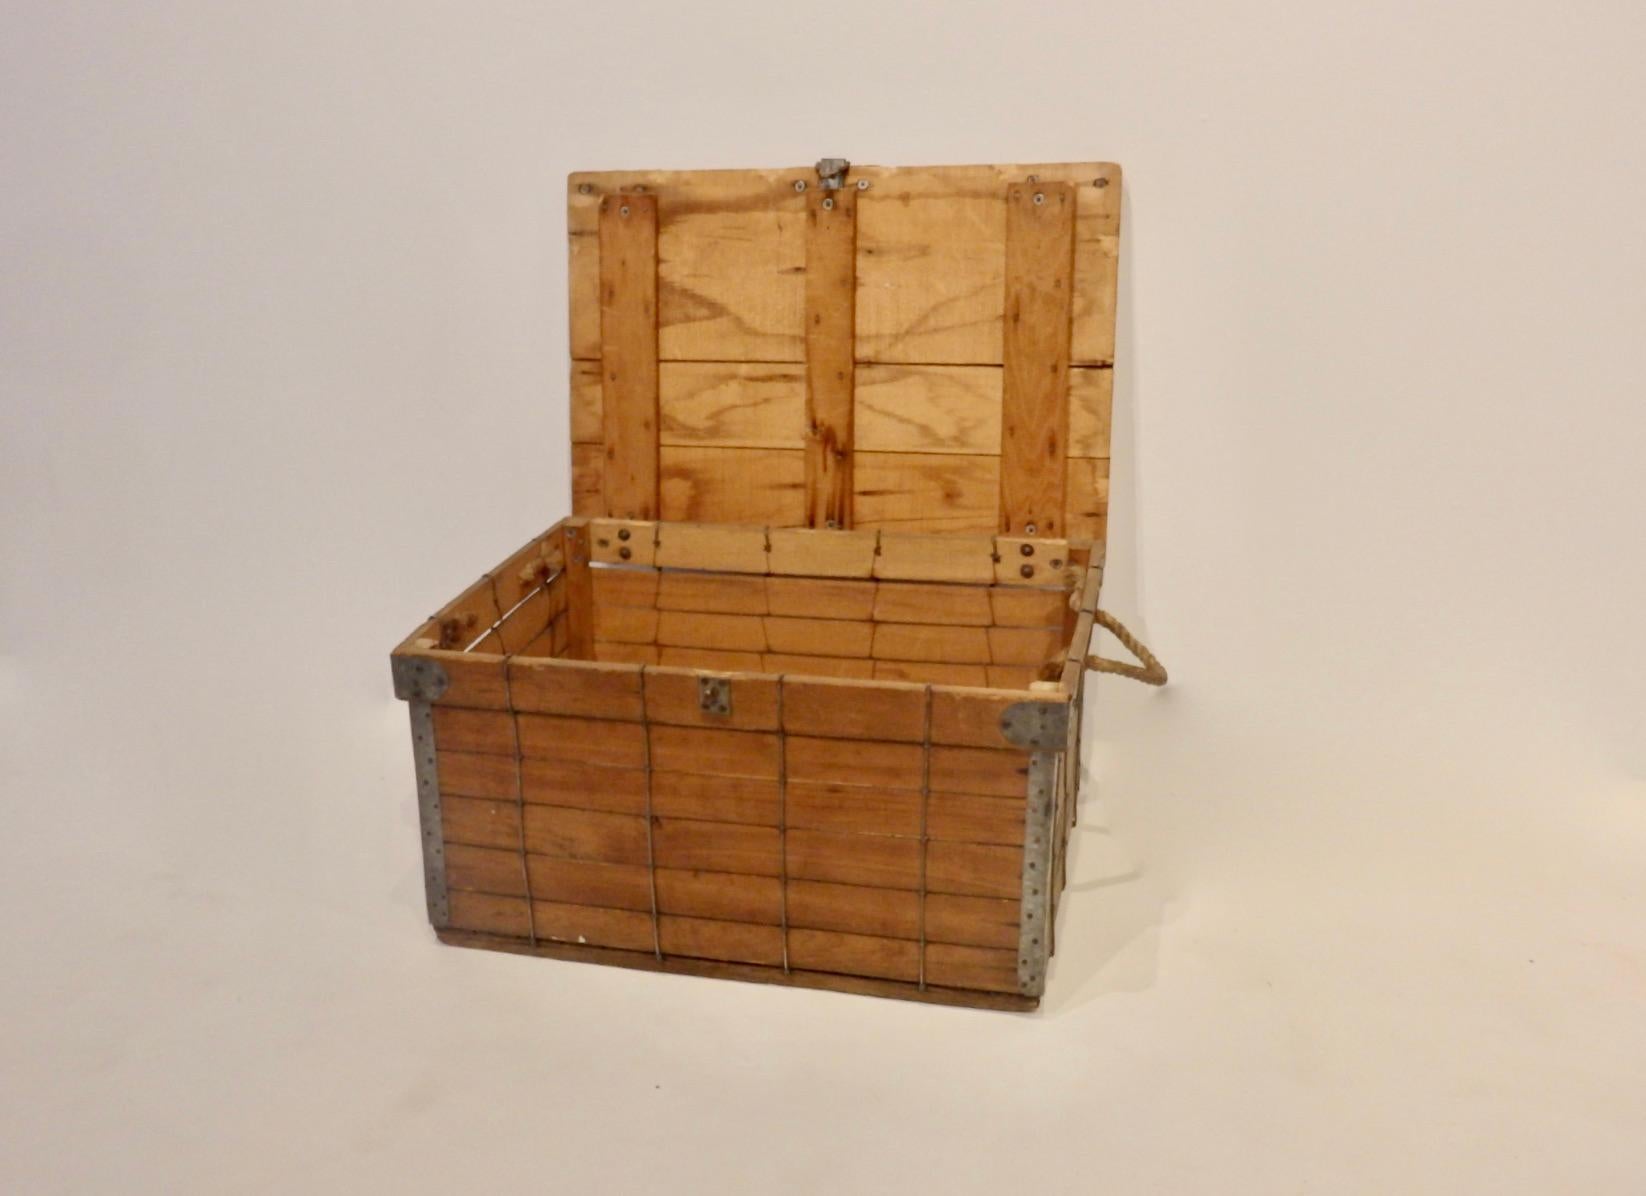 20th Century 1940s Folk Art Wire with Slatted Wood Lidded Box or Storage Trunk For Sale